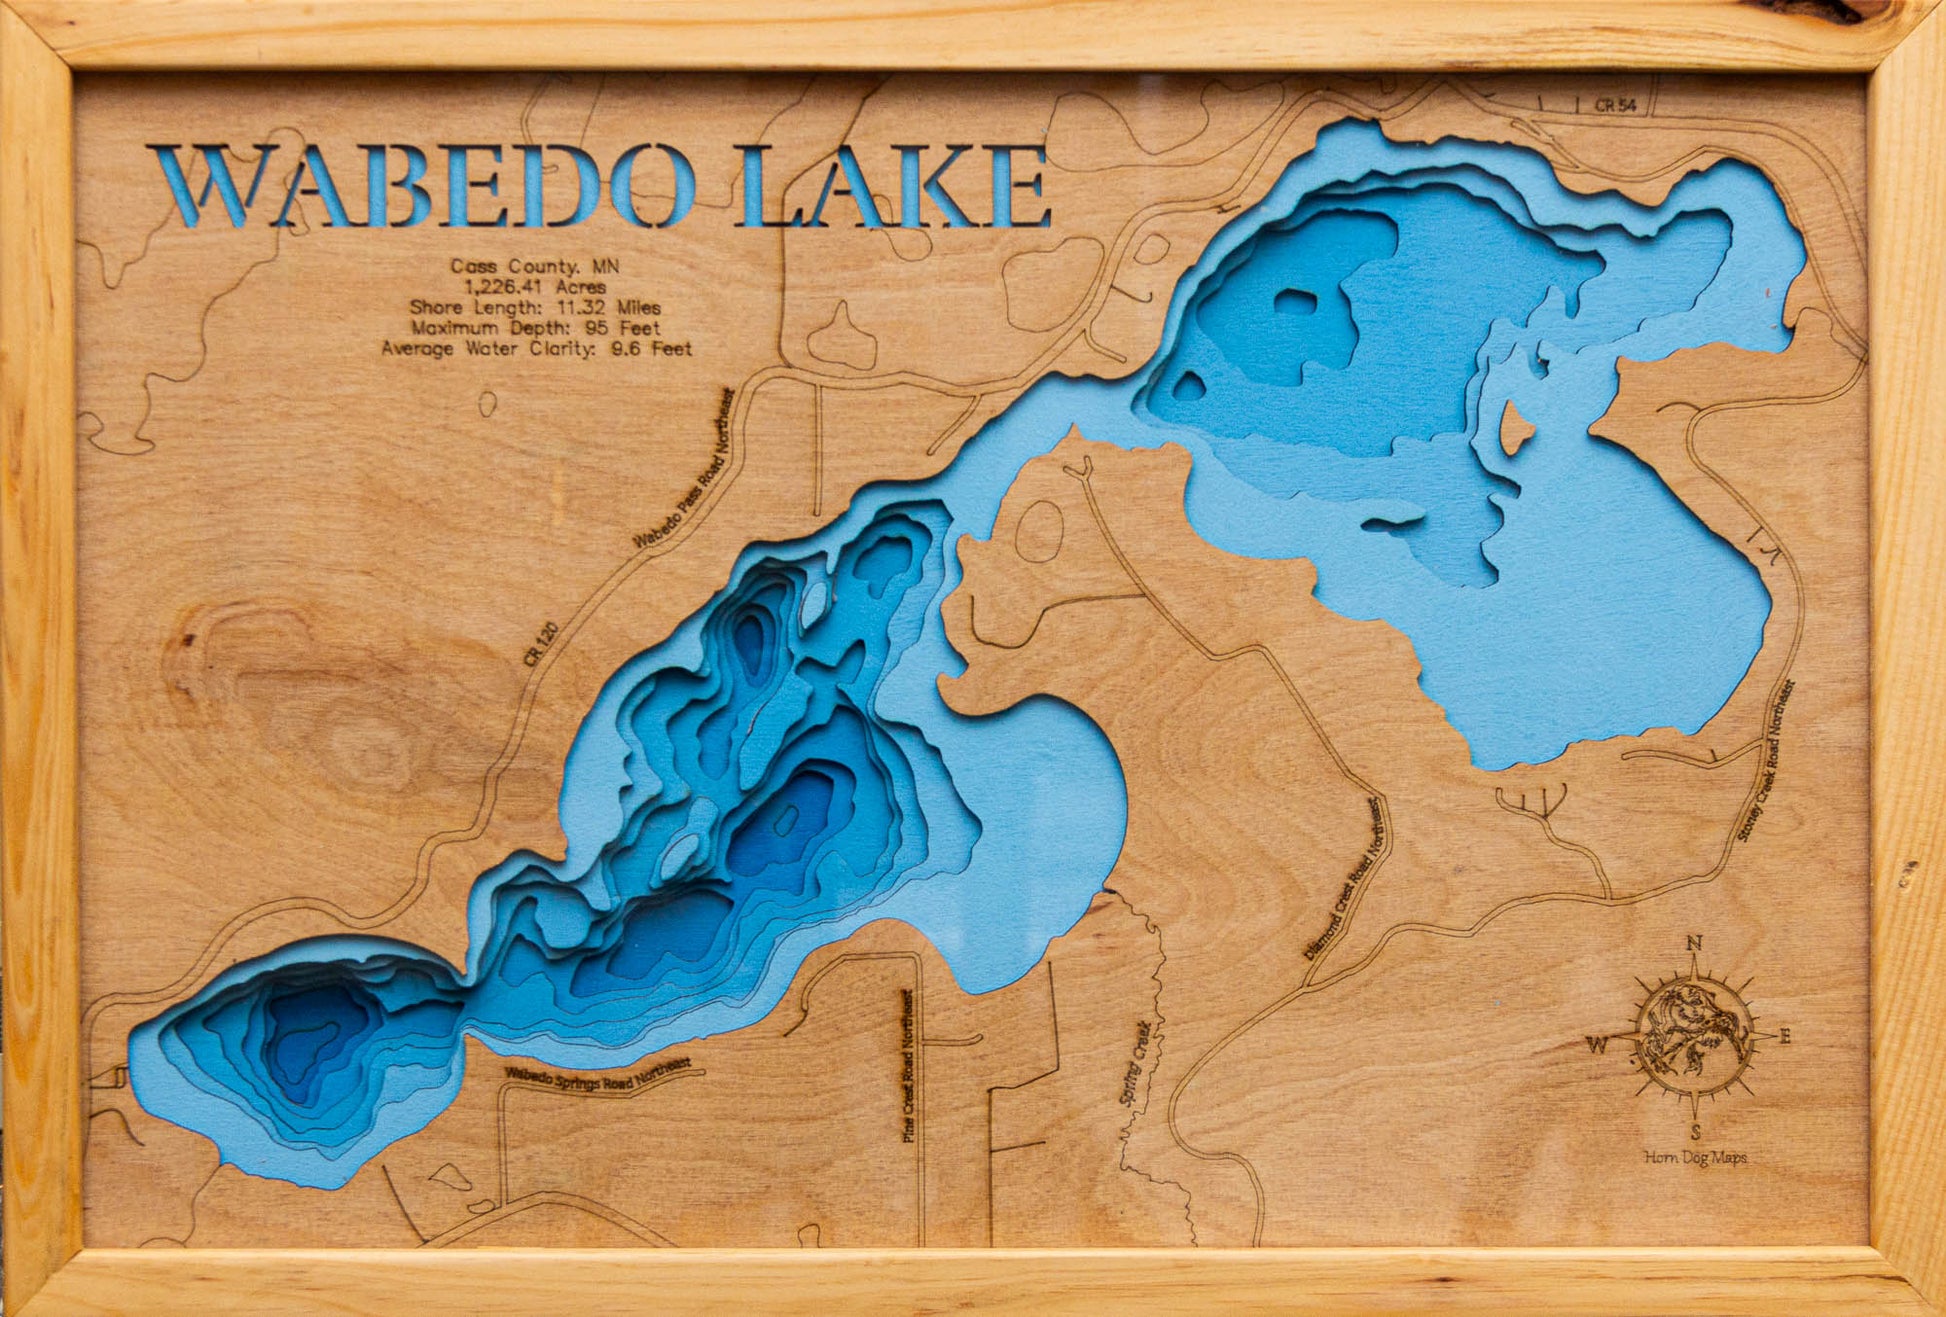 Wabedo Lake in Cass County, MN